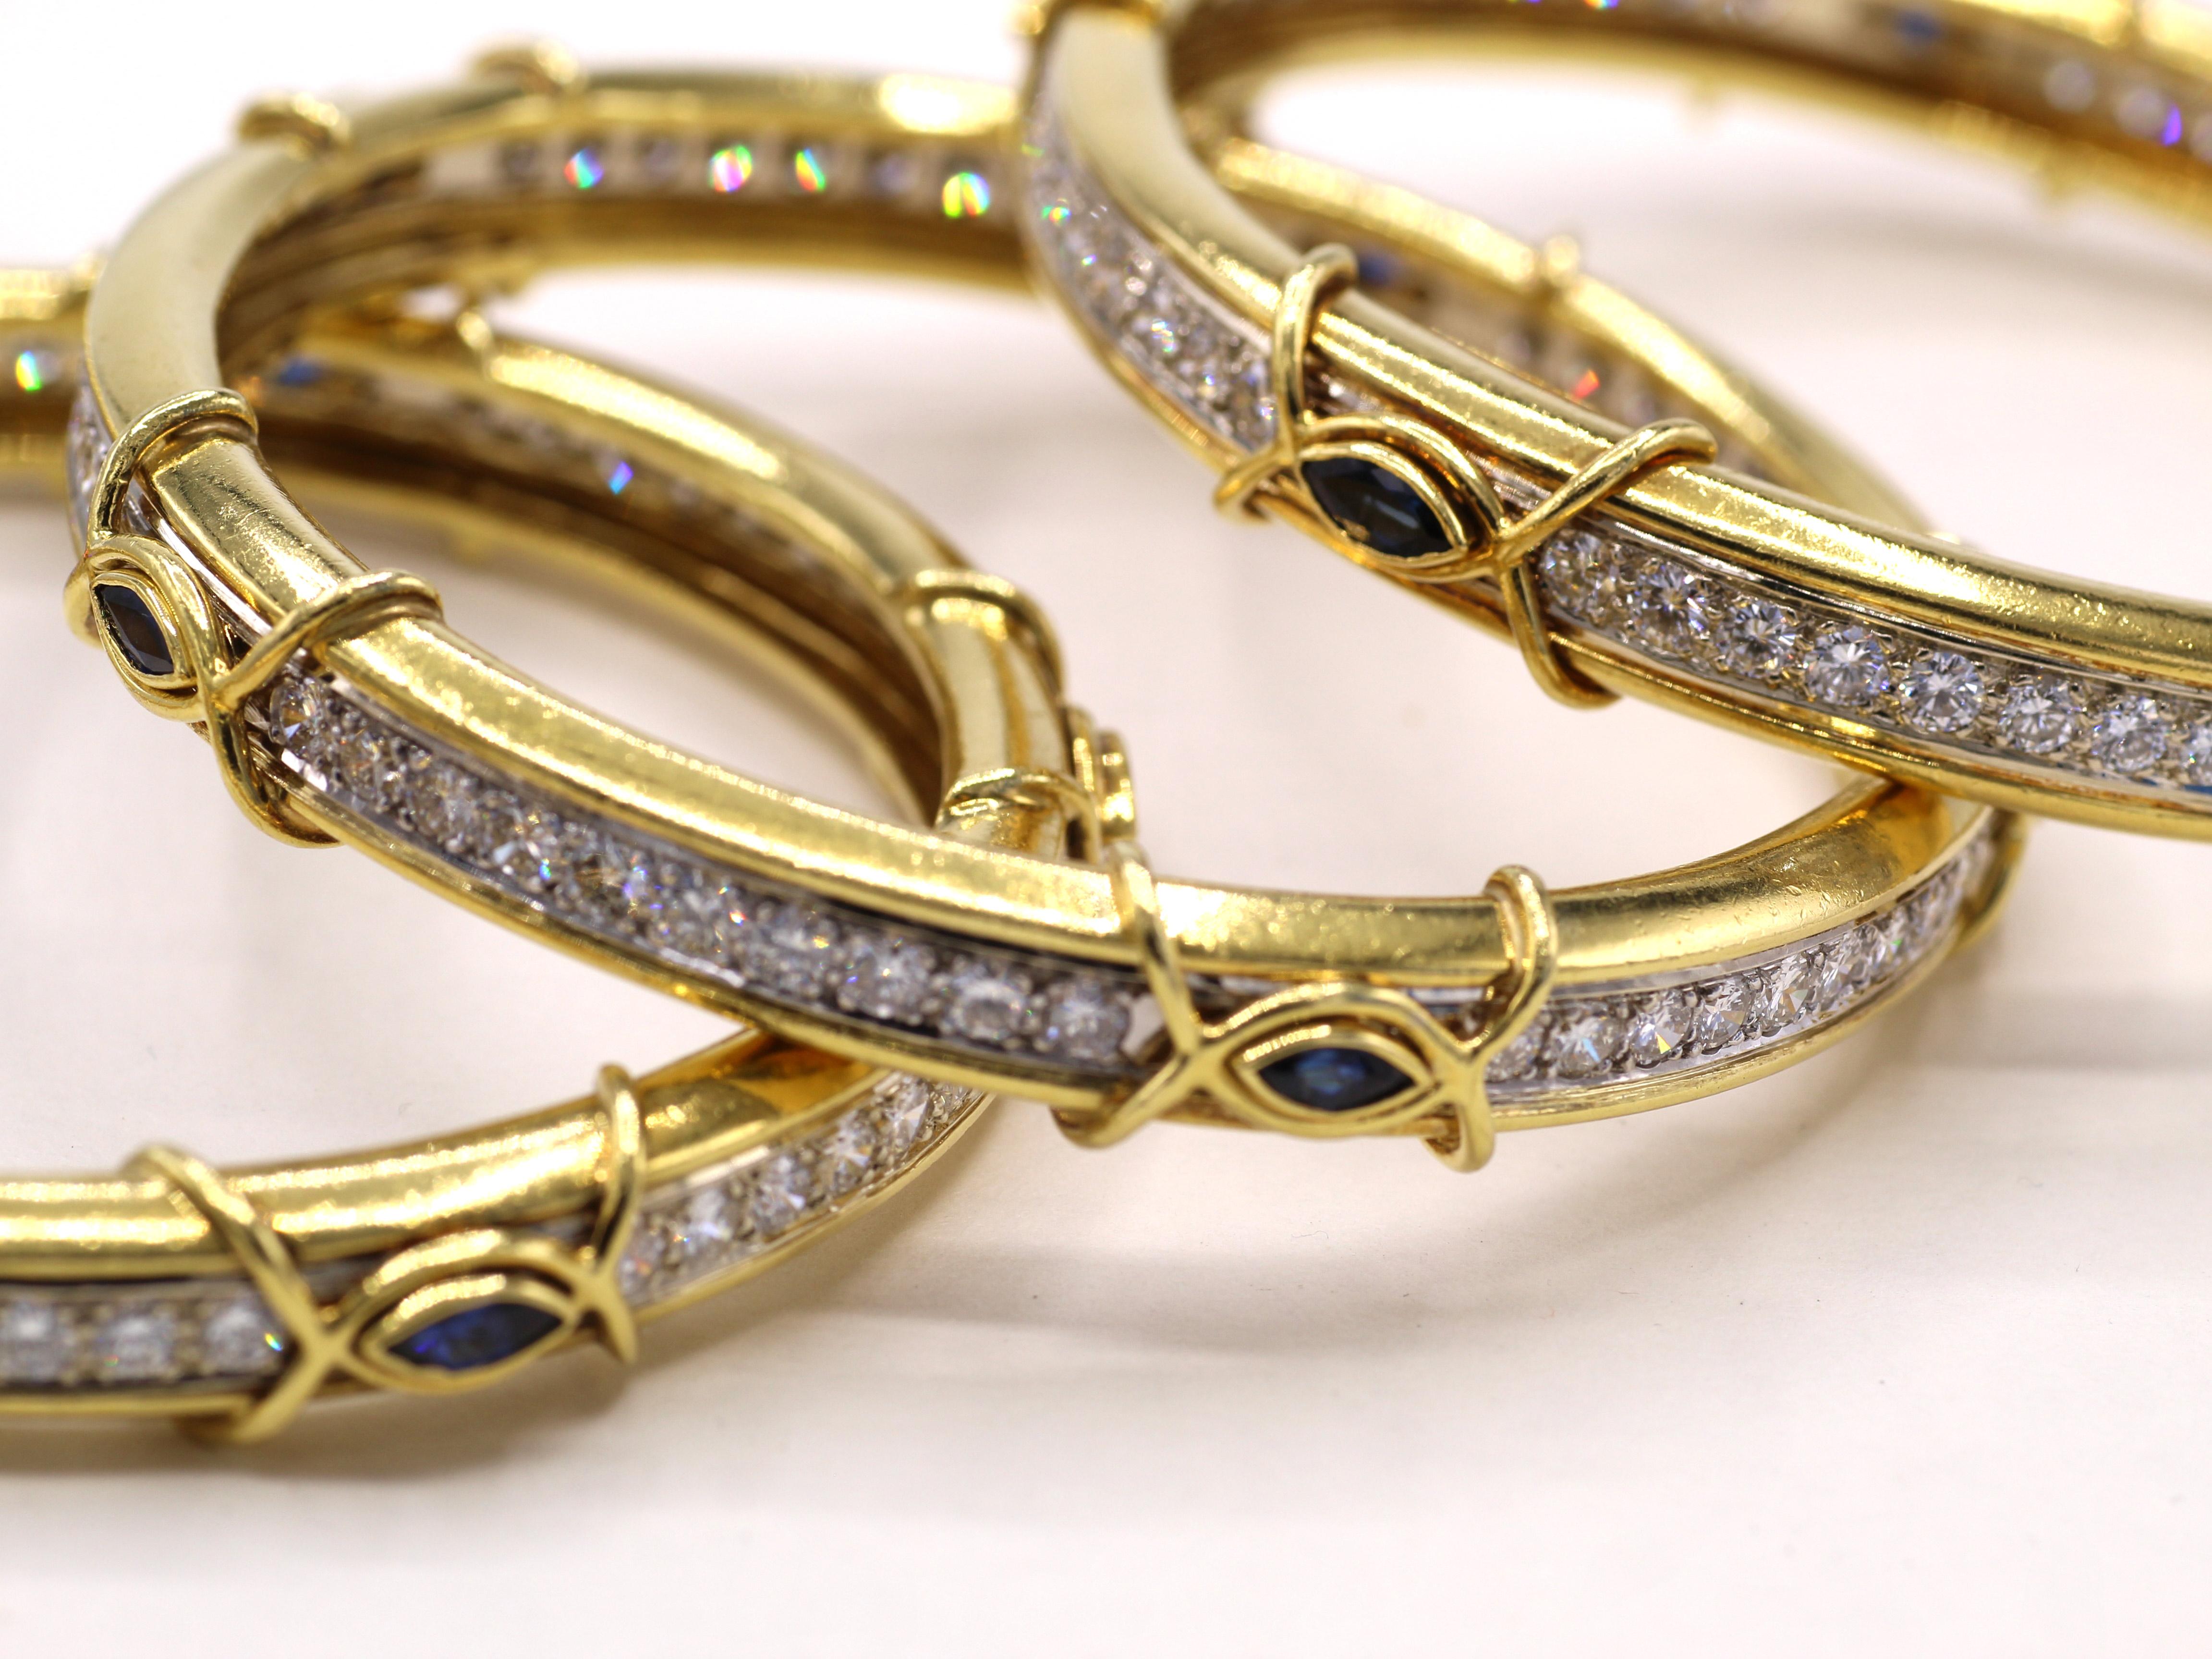 Beautifully designed and masterfully handcrafted in 18 karat gold, this set of 3 bangle bracelets by renown jeweler Boris Lebeau make for a chic, stylish and most wearable look on every wrist. Each bangle is set with a channel of 40 perfectly